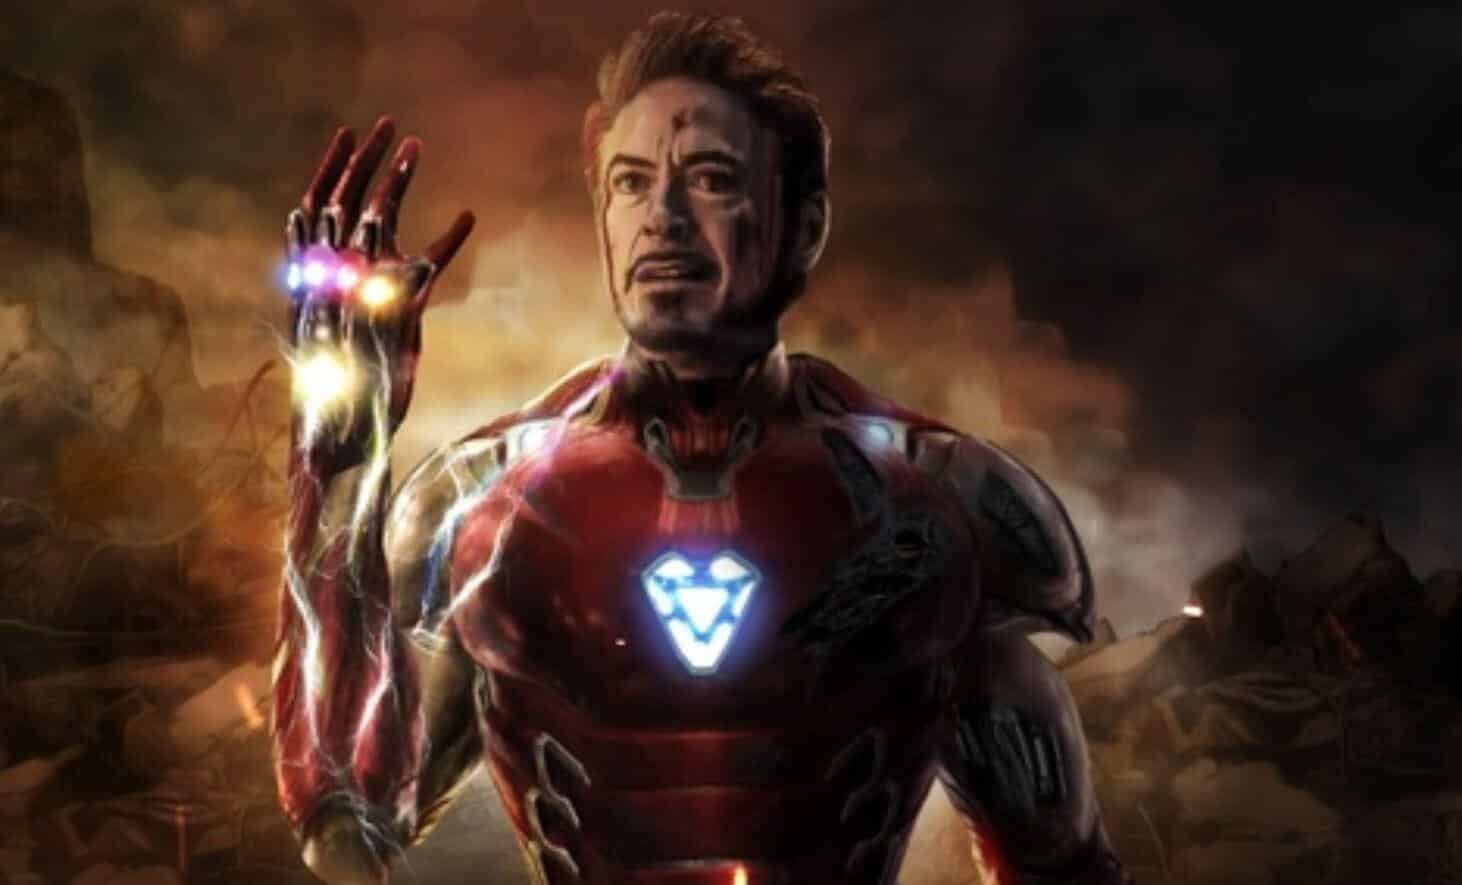 Petition Launched To Bring Iron Man Back To The MCU